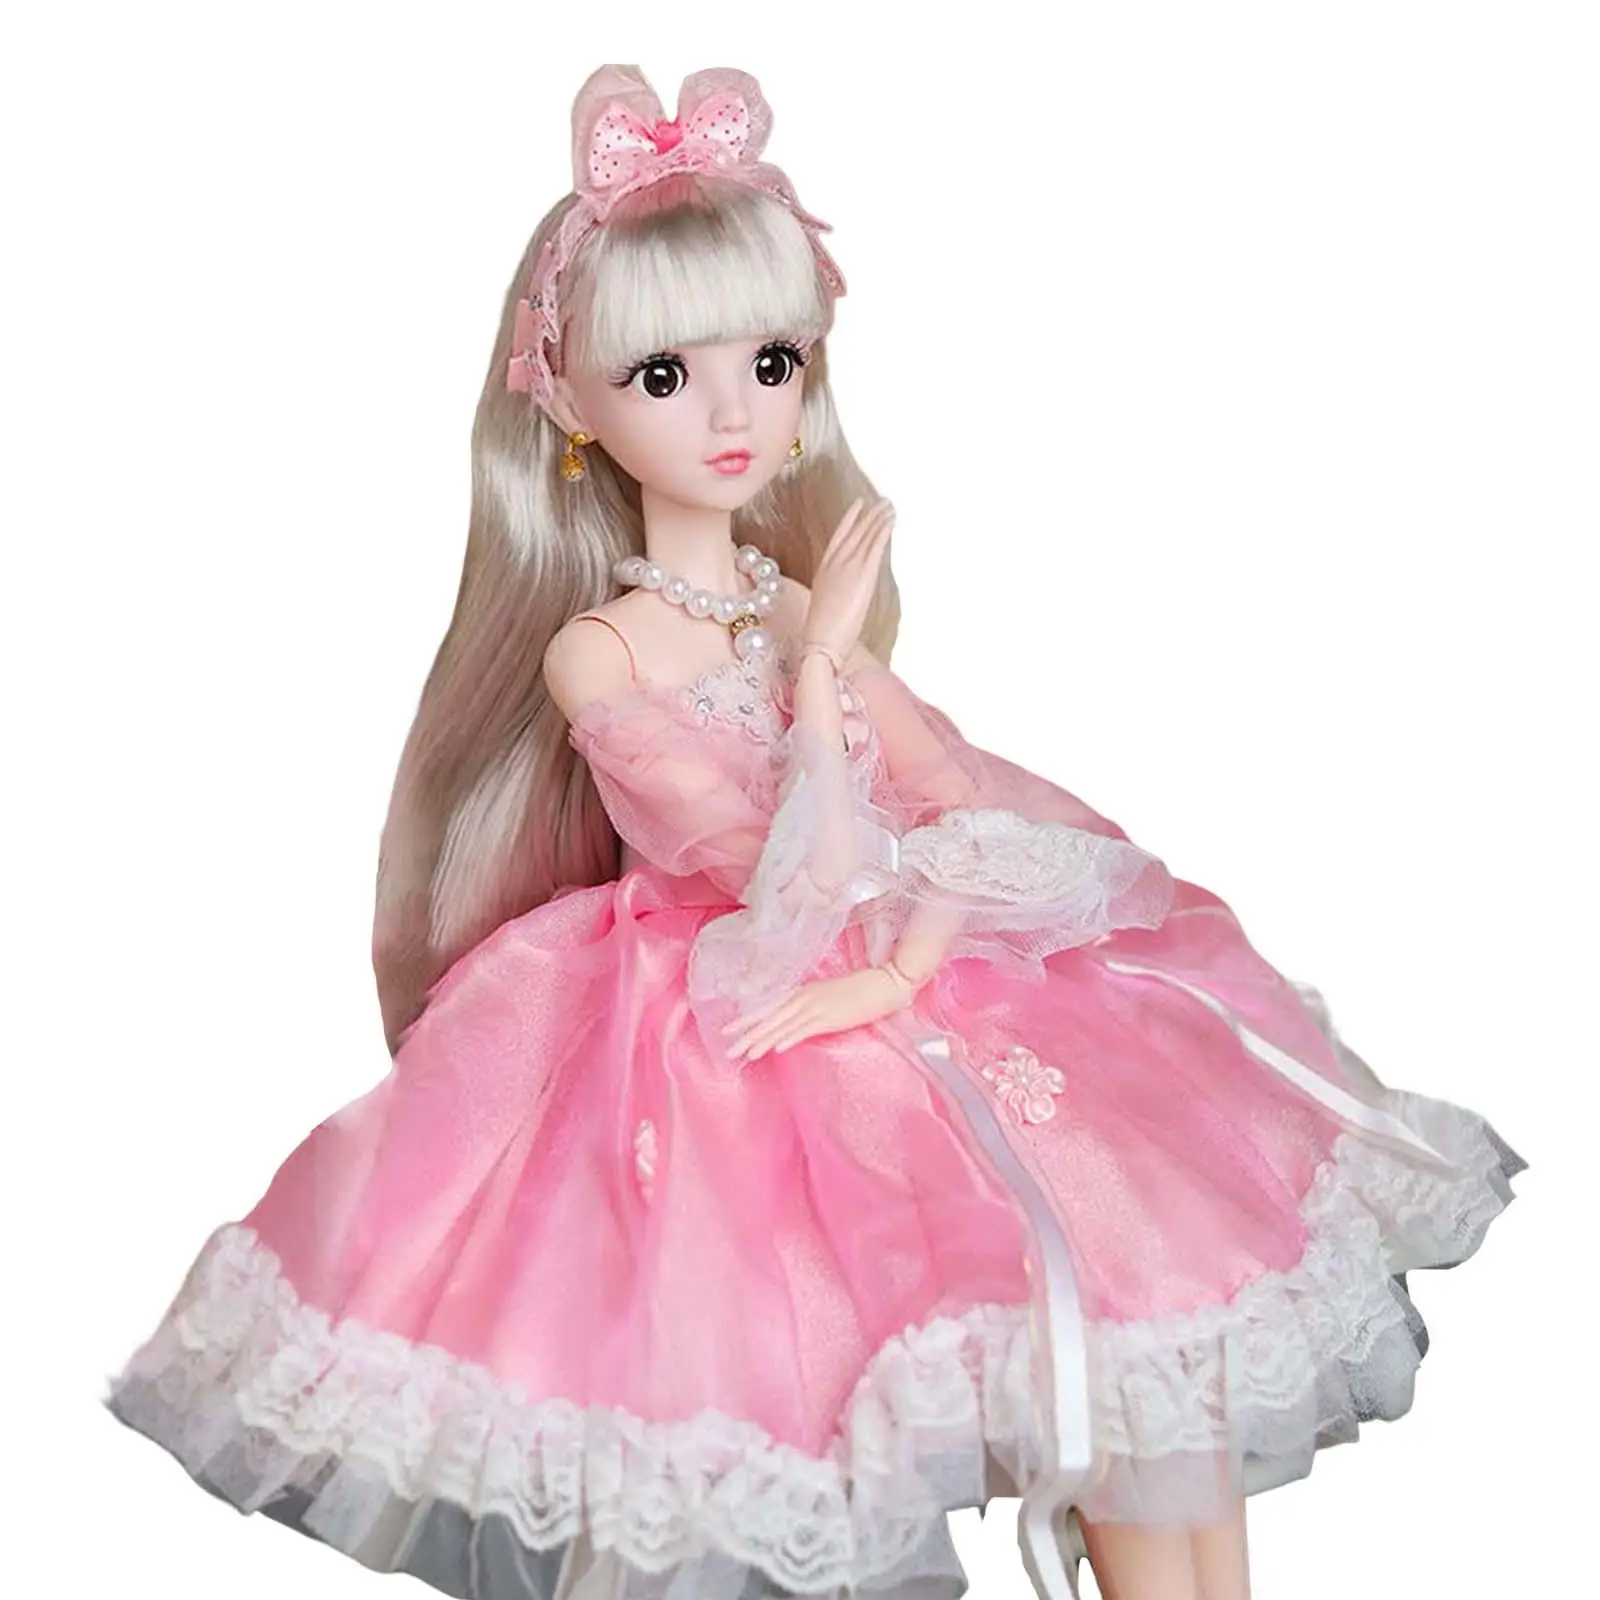 Girls Doll BJD Dolls 24 inch Ball Jointed Doll Princess Doll for Best Gift Doll Playset Tea Party Girl Kids Toys images - 6